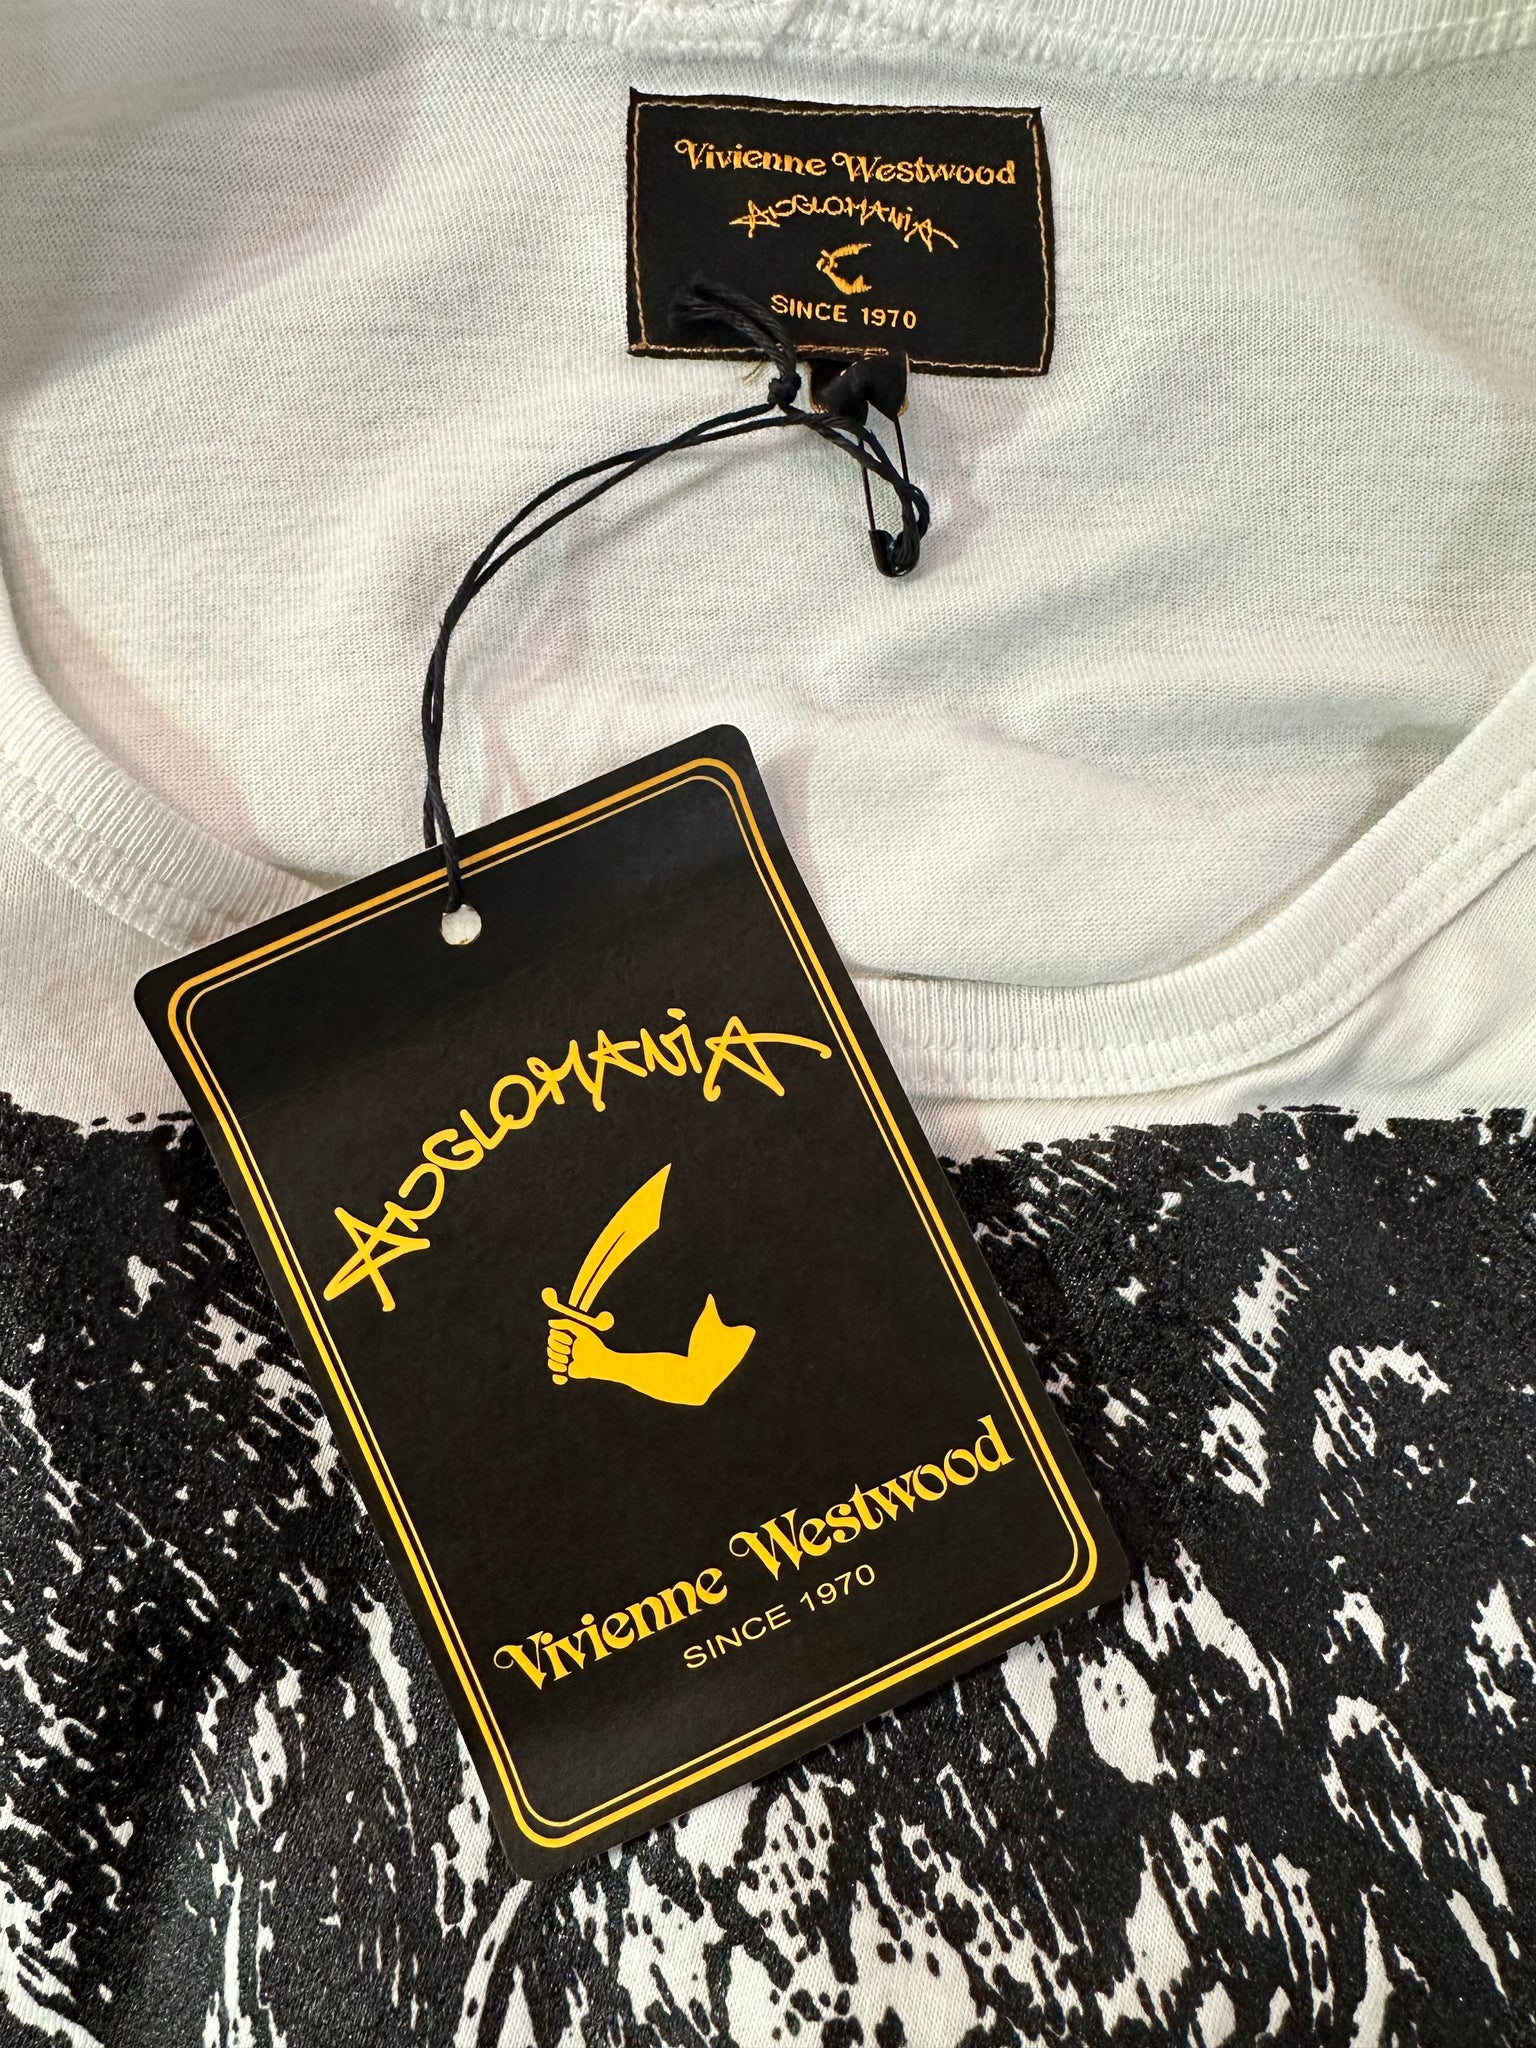  Vivienne Westwood  Anglomania Eagle Print Pullover Top  LABEL/TAG 5 of 5